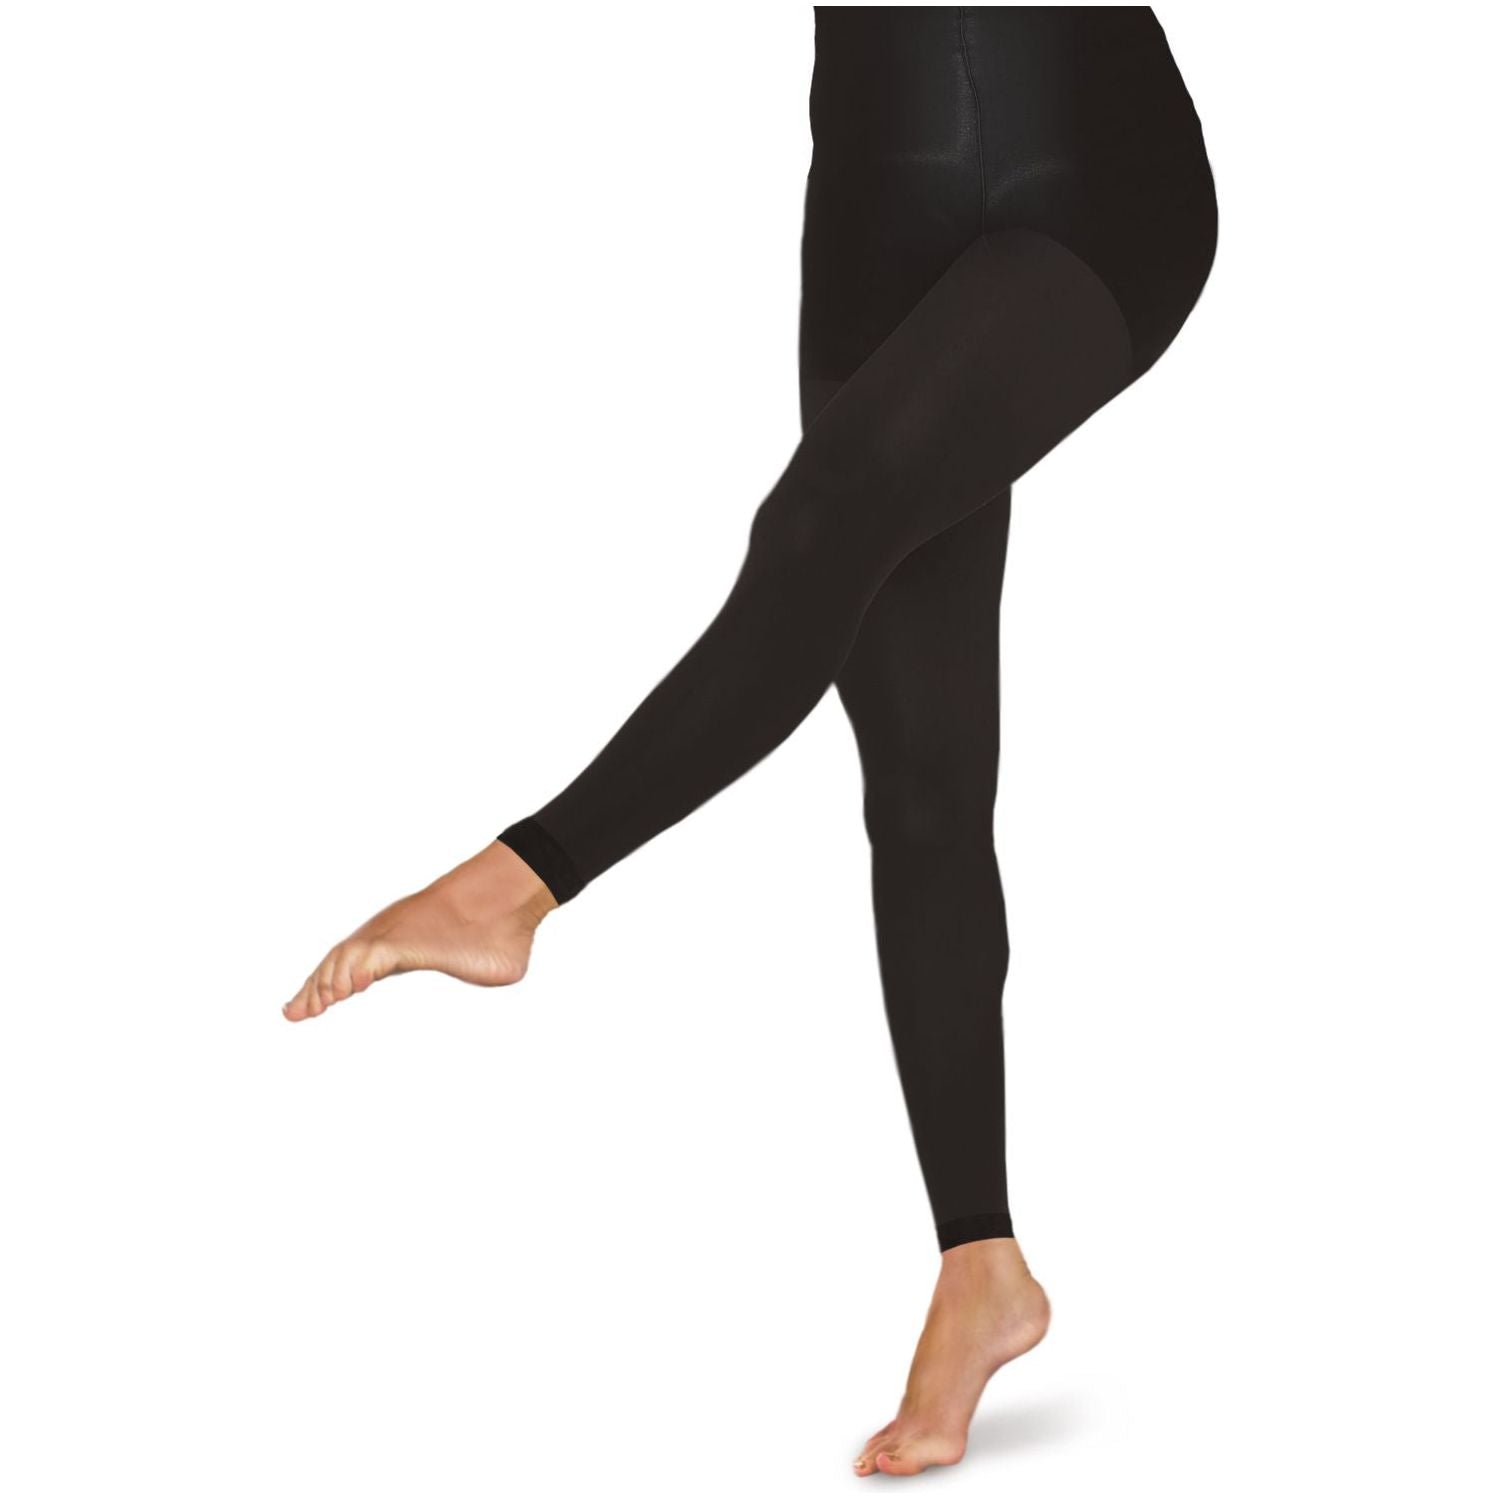 Women's Footless Tights  Footless tights, Thermal tights, Women